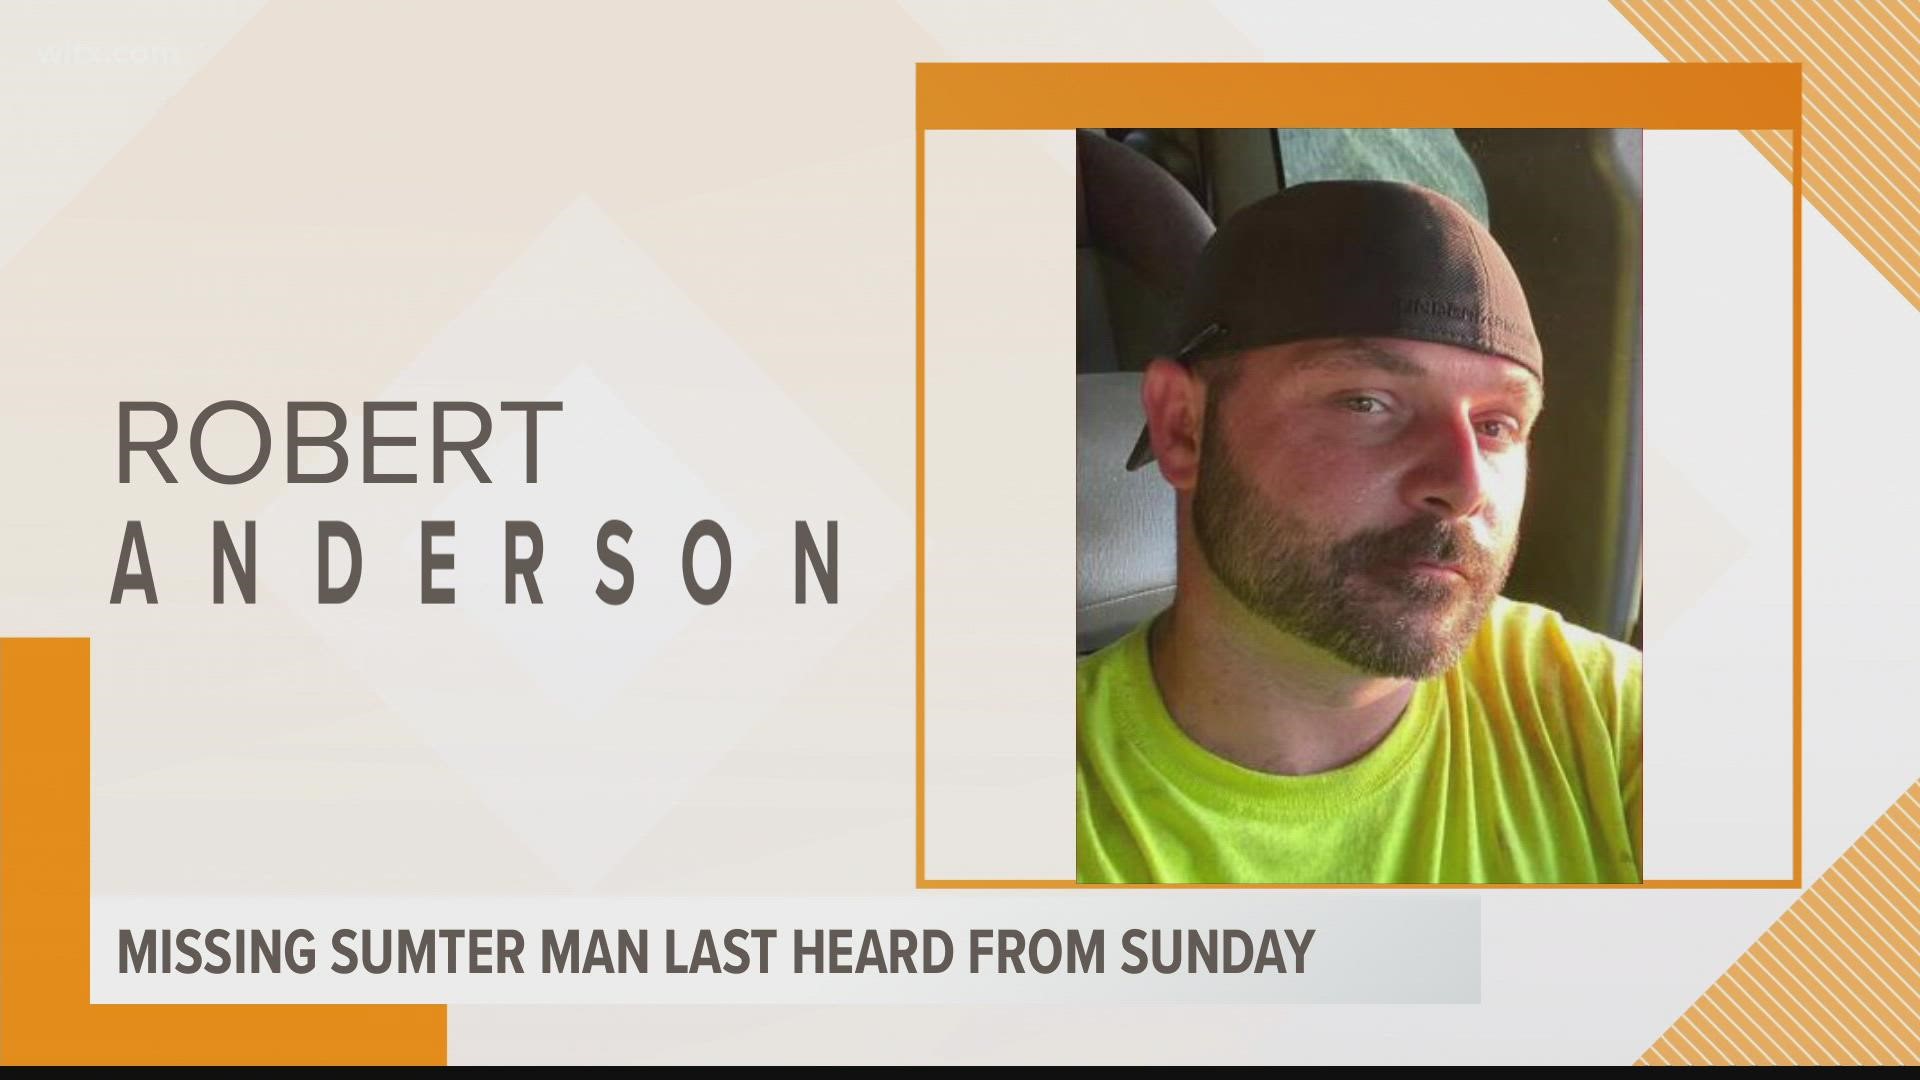 Sumter Police are looking for 34-year-old Robert Anderson, who they say is missing and was last seen on Sunday.